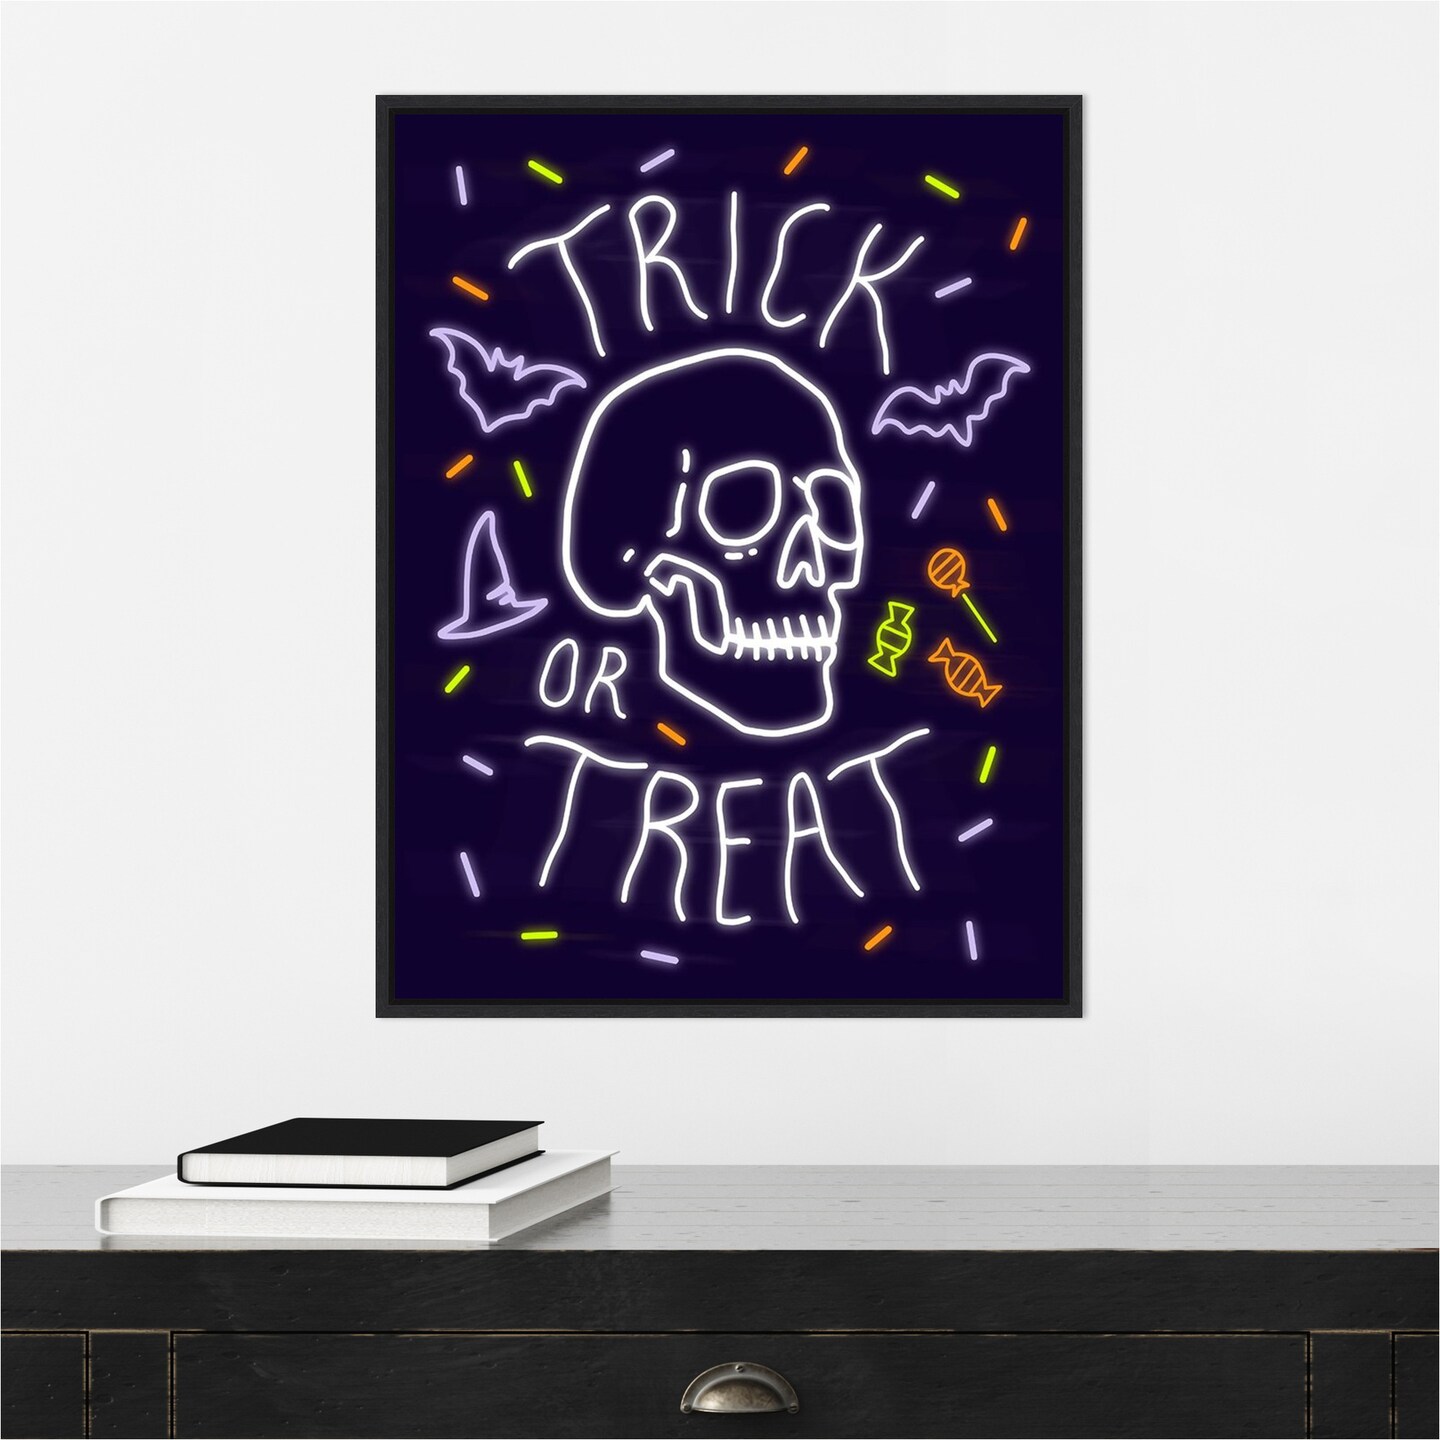 Neon Halloween I by Victoria Barnes 18-in. W x 24-in. H. Canvas Wall Art Print Framed in Black